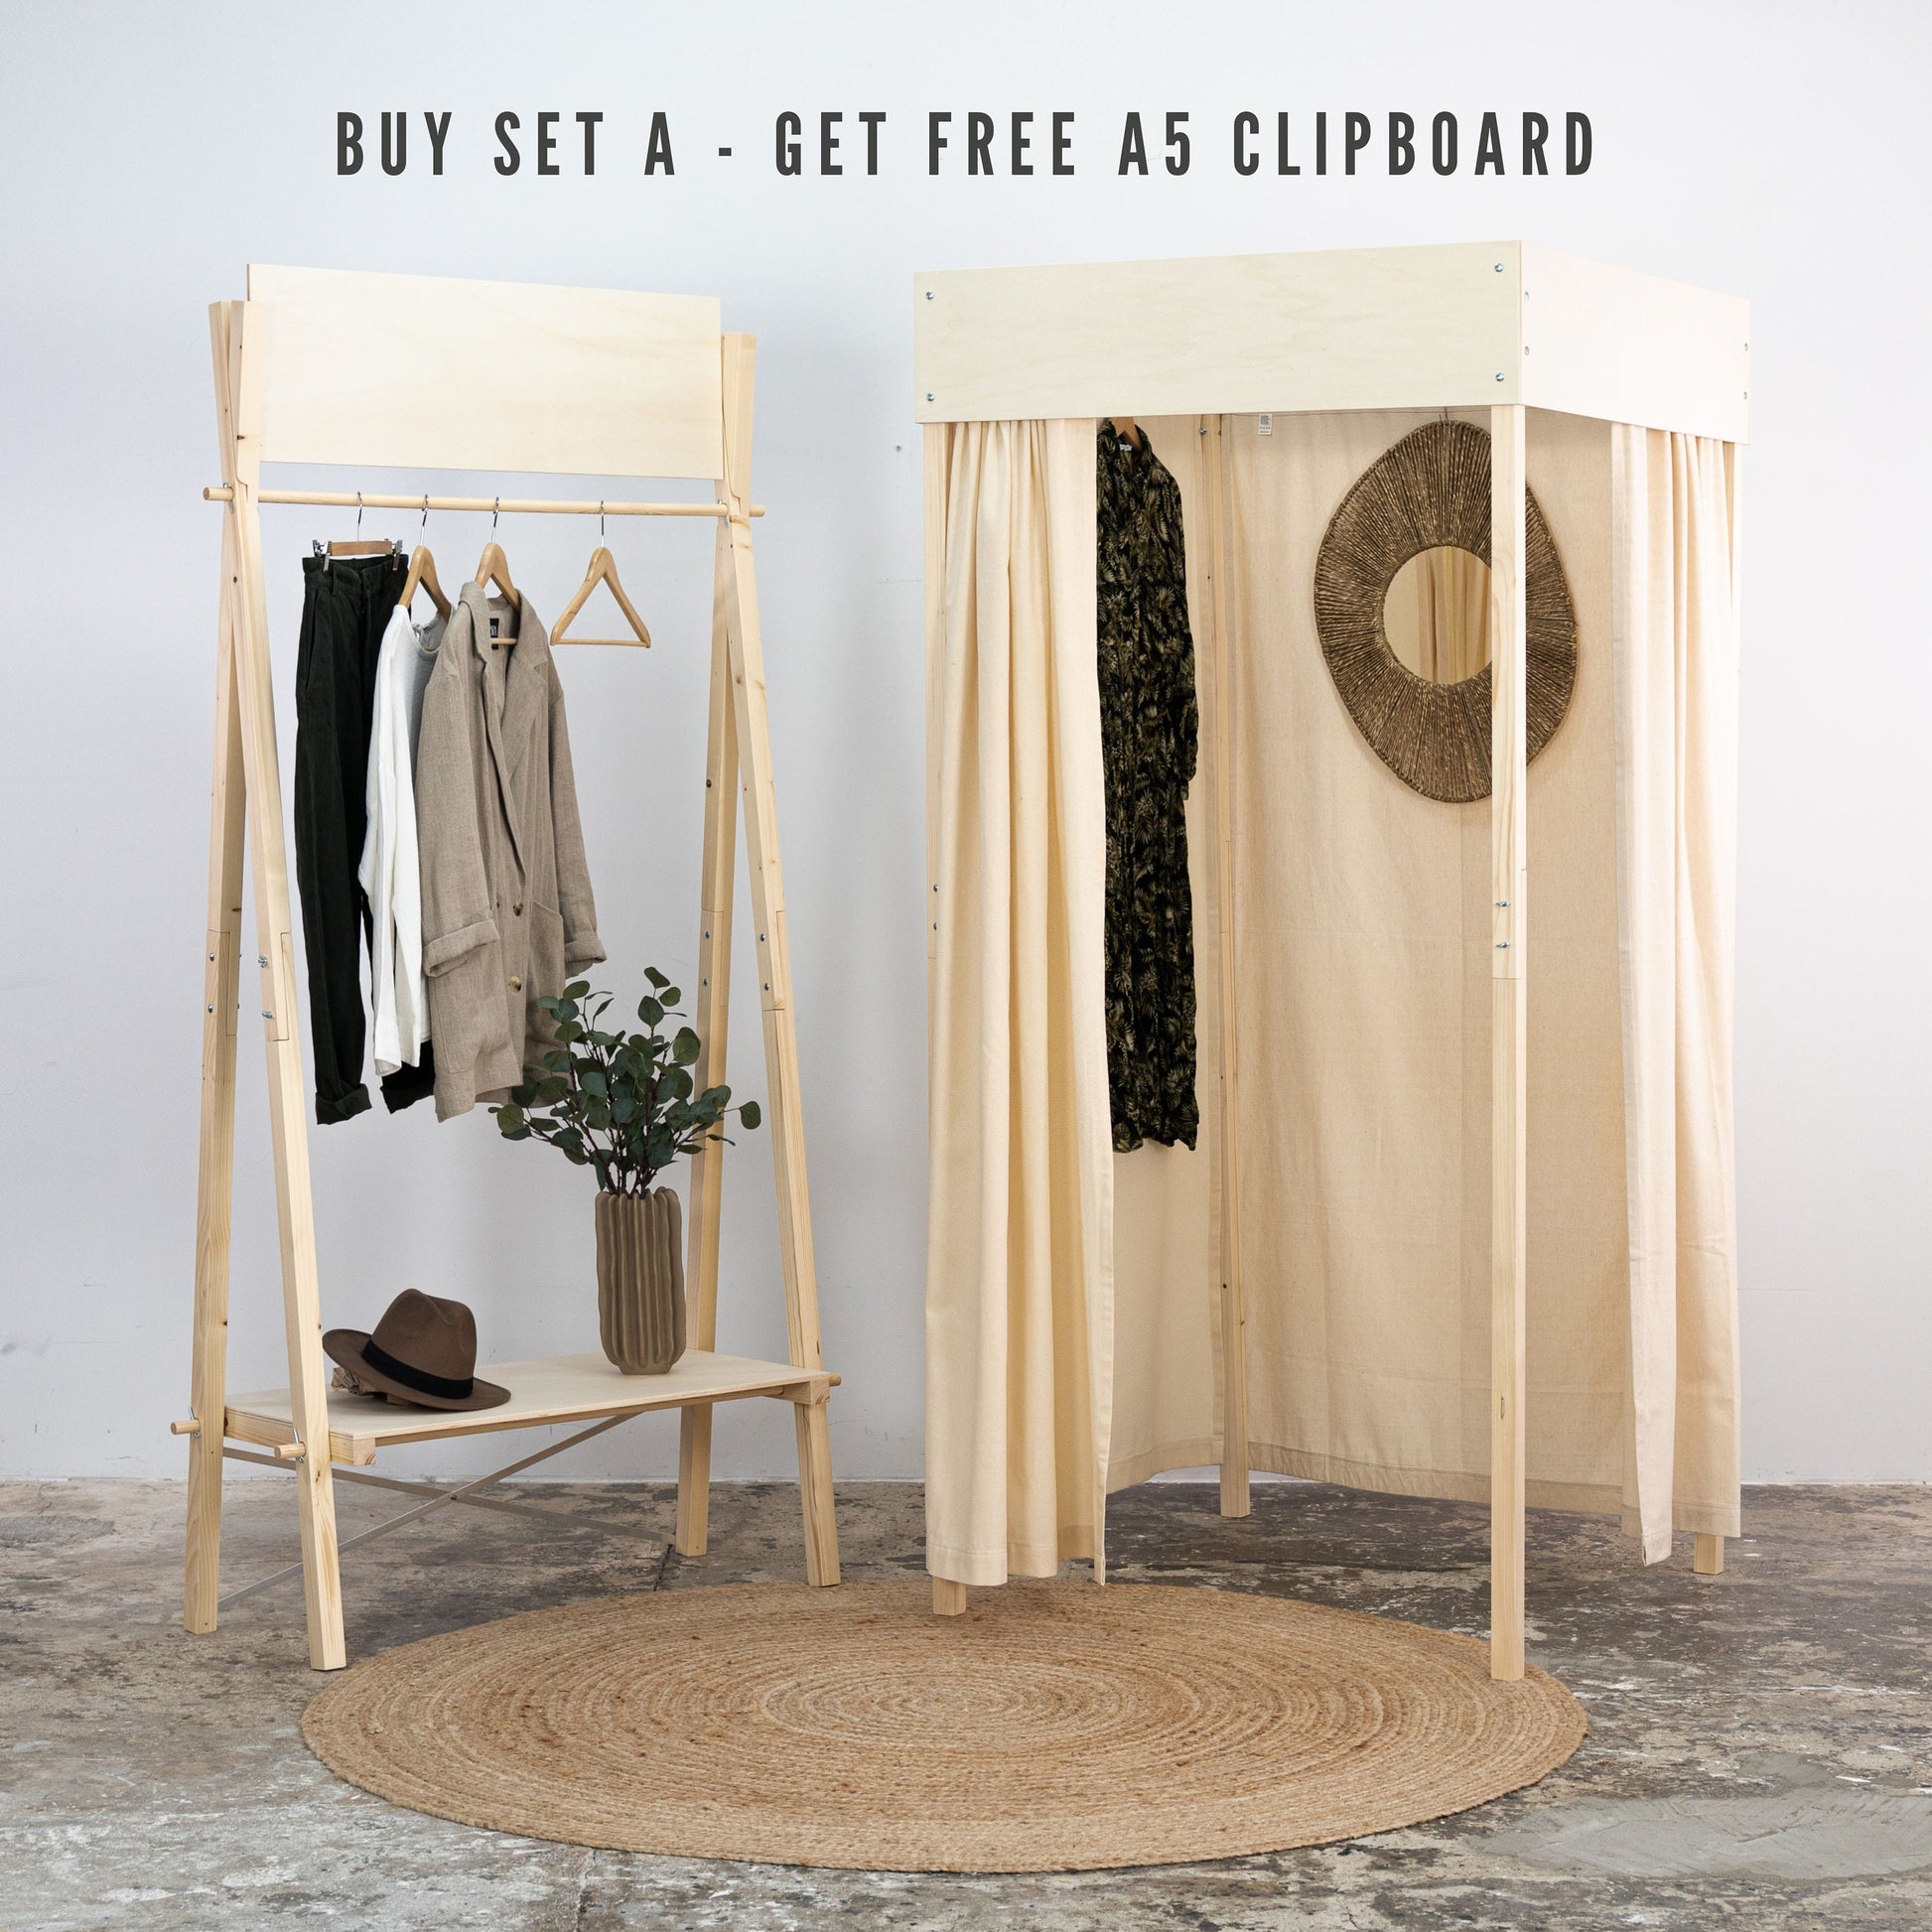 SET Chicago - garment rack and fitting room bundle for fashion designers, clothing brands, showrooms, fashion events | Milimetry